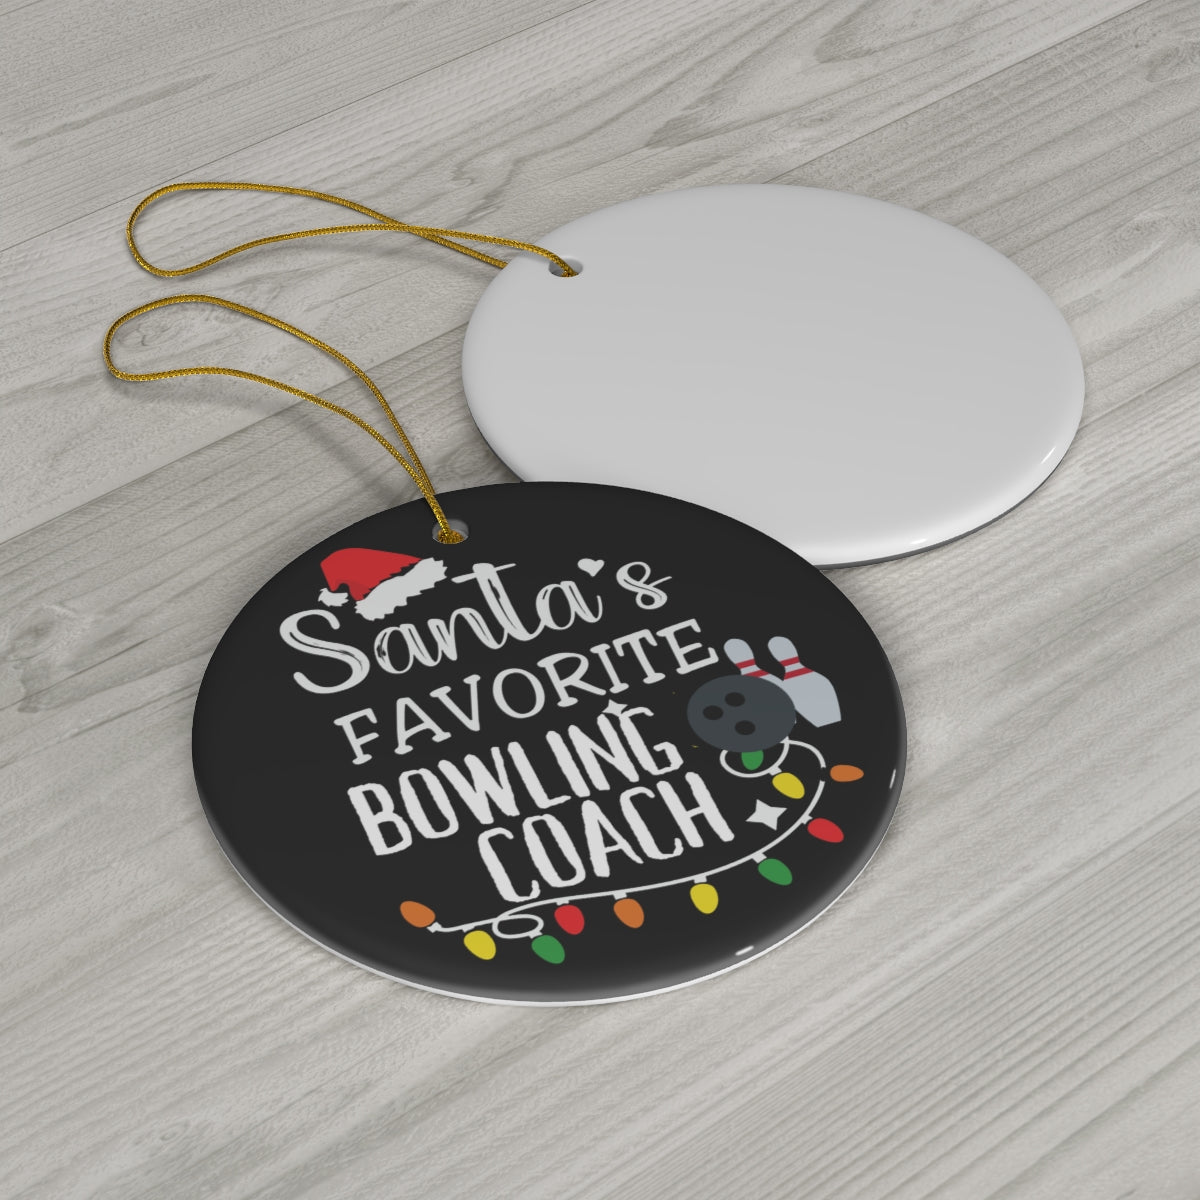 Bowling Coach Gift, Bowling Ornament, Bowling Christmas Ornament, Ceramic Tree Ornament for Coaches